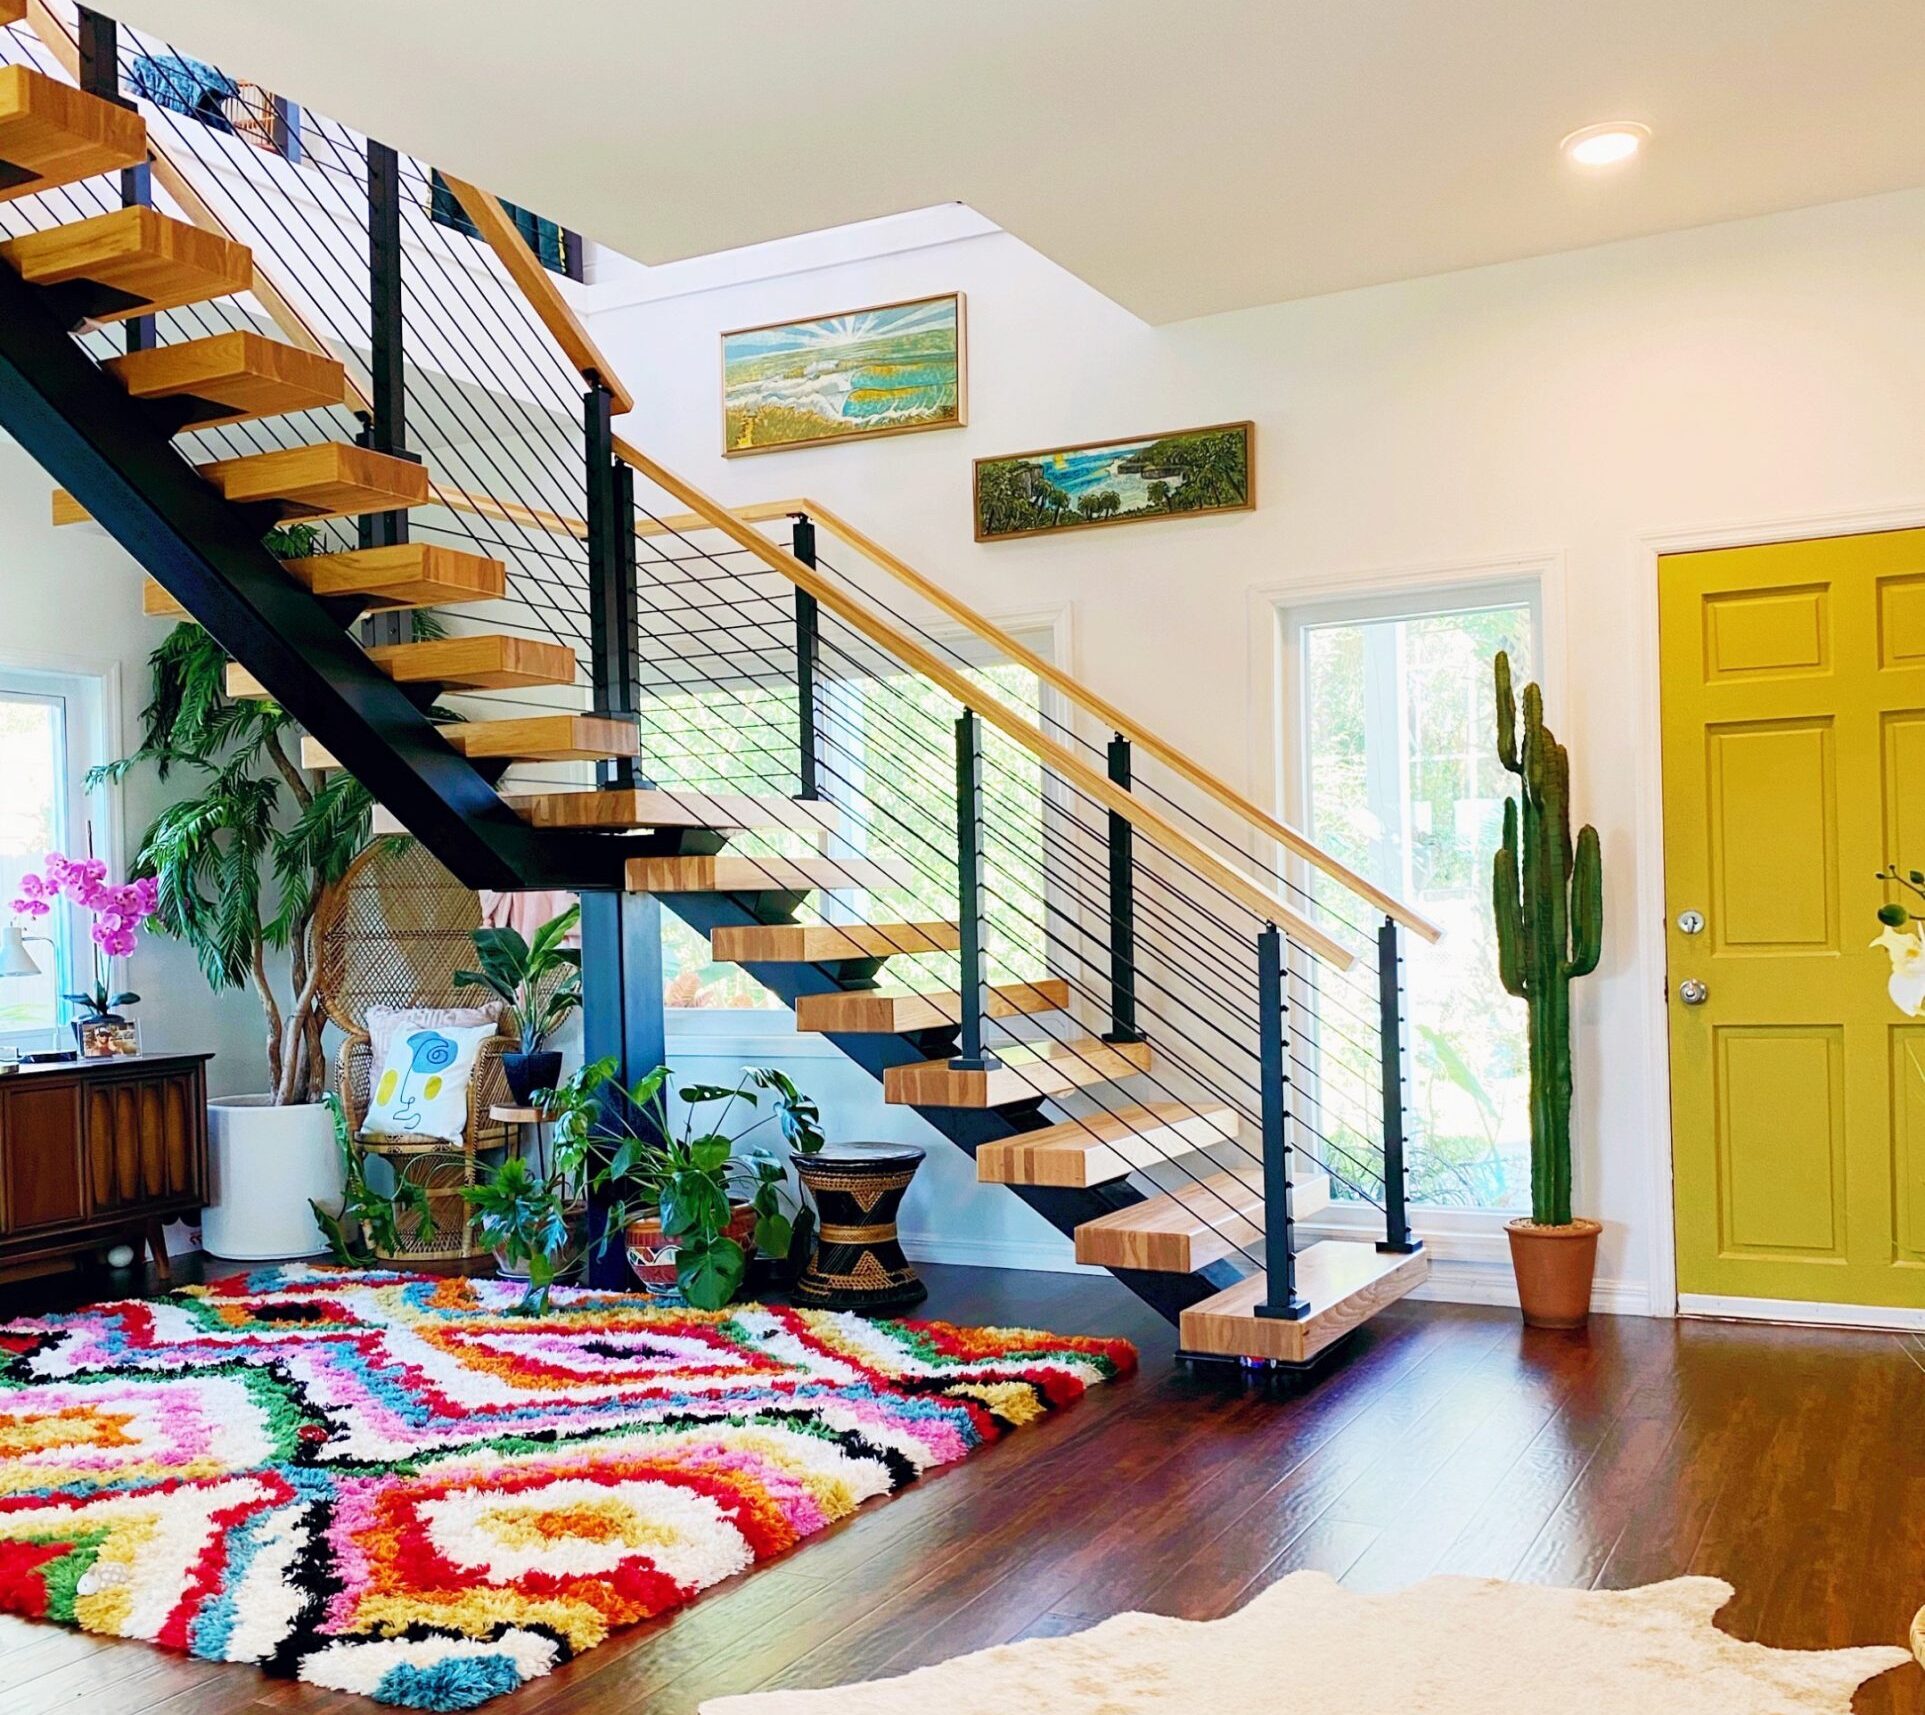 This fun home has a yellow door with a cactus next to it. There is a bright, multi-colored rug in the center of the room with various plants under the floating staircase. 